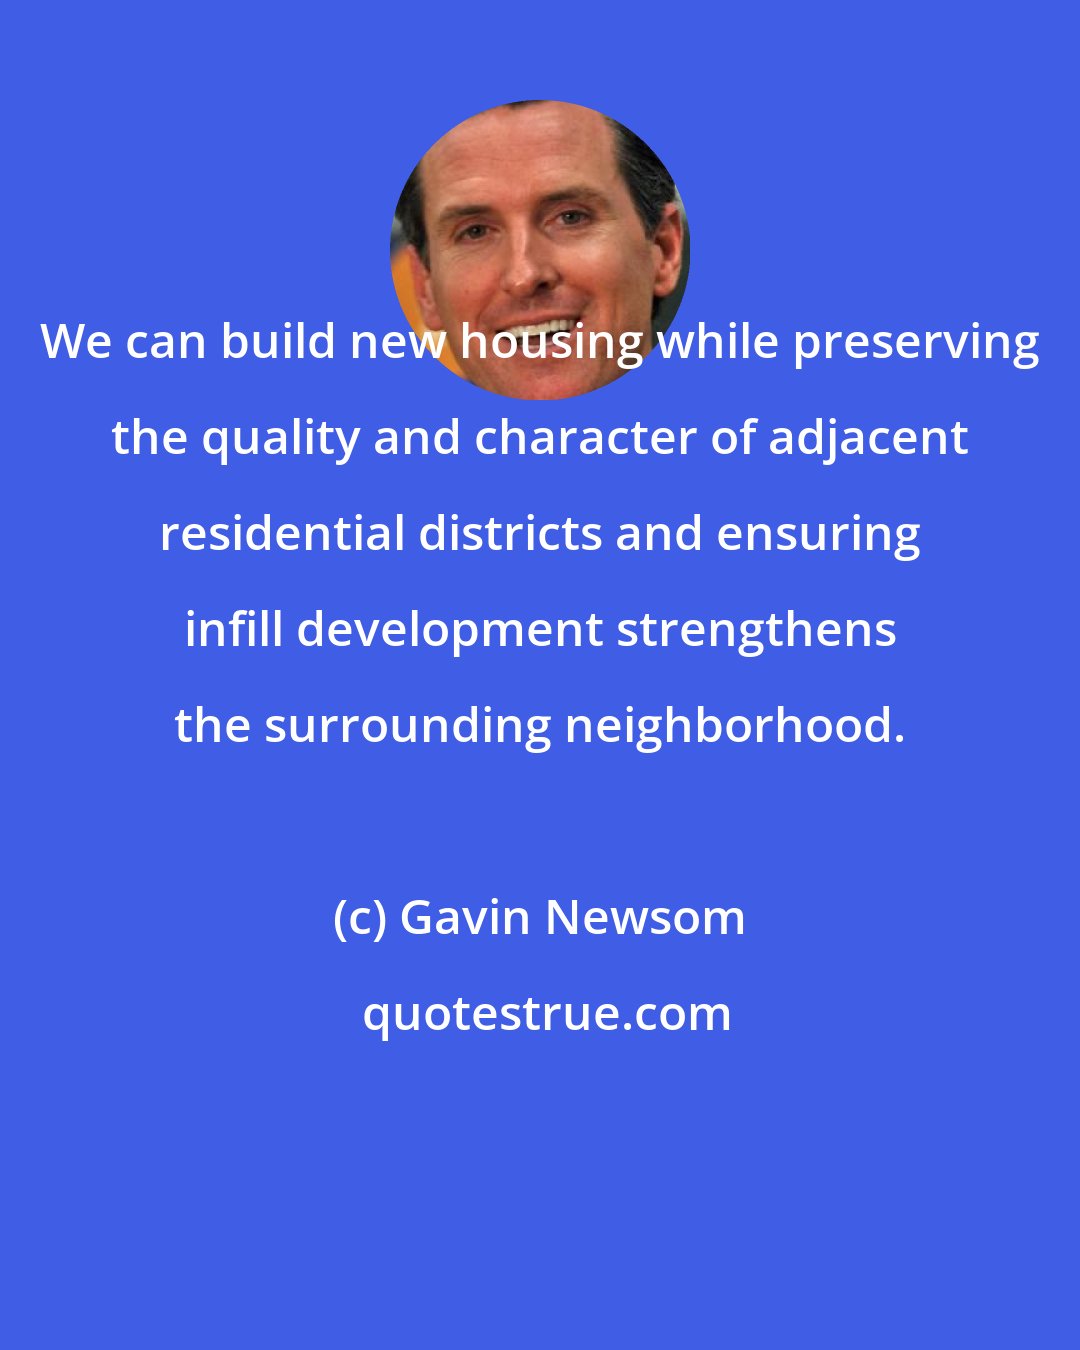 Gavin Newsom: We can build new housing while preserving the quality and character of adjacent residential districts and ensuring infill development strengthens the surrounding neighborhood.